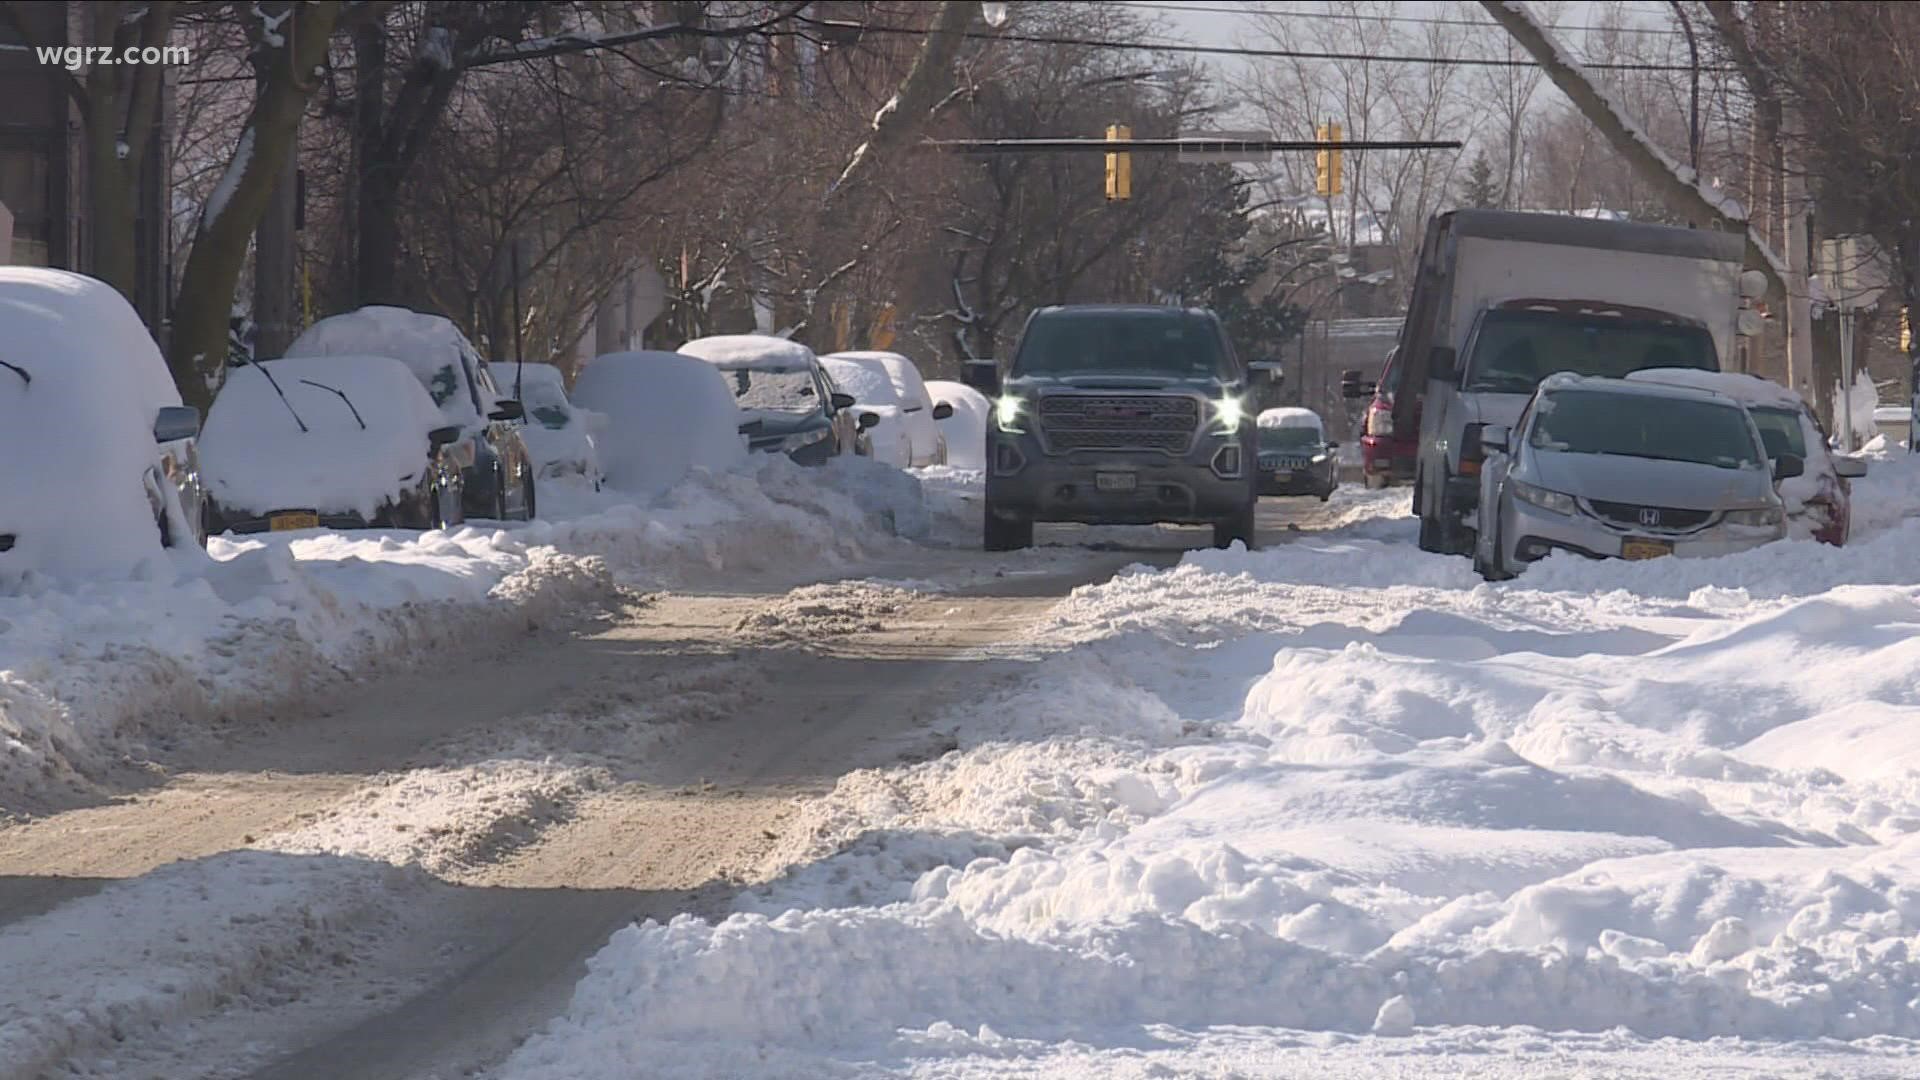 With this snow event right around the corner, Buffalo Common council-members want answers about what's being done to ensure the city is prepared.